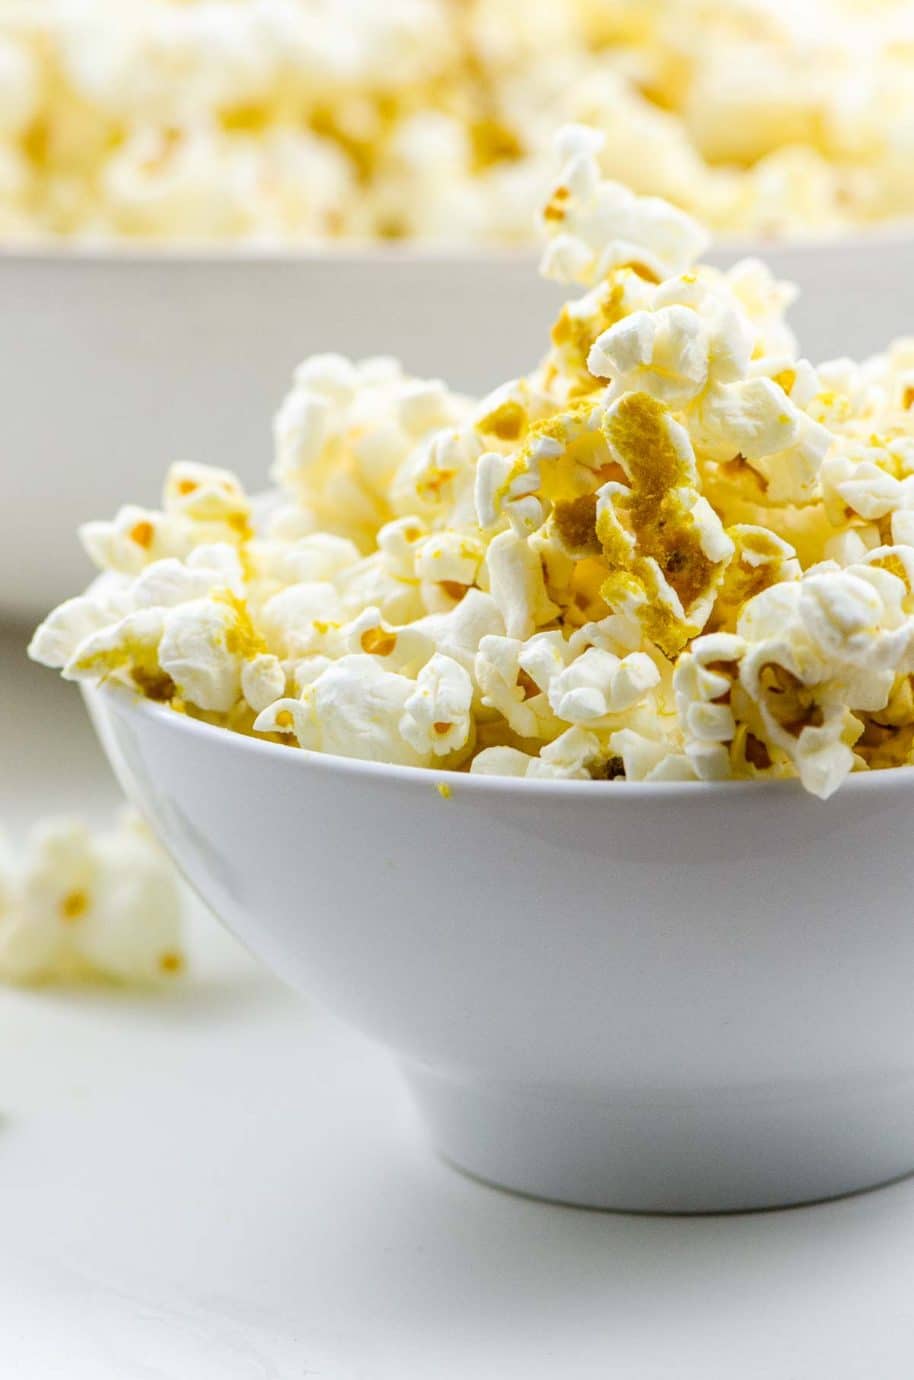 popcorn with nutritional yeast in white bowls